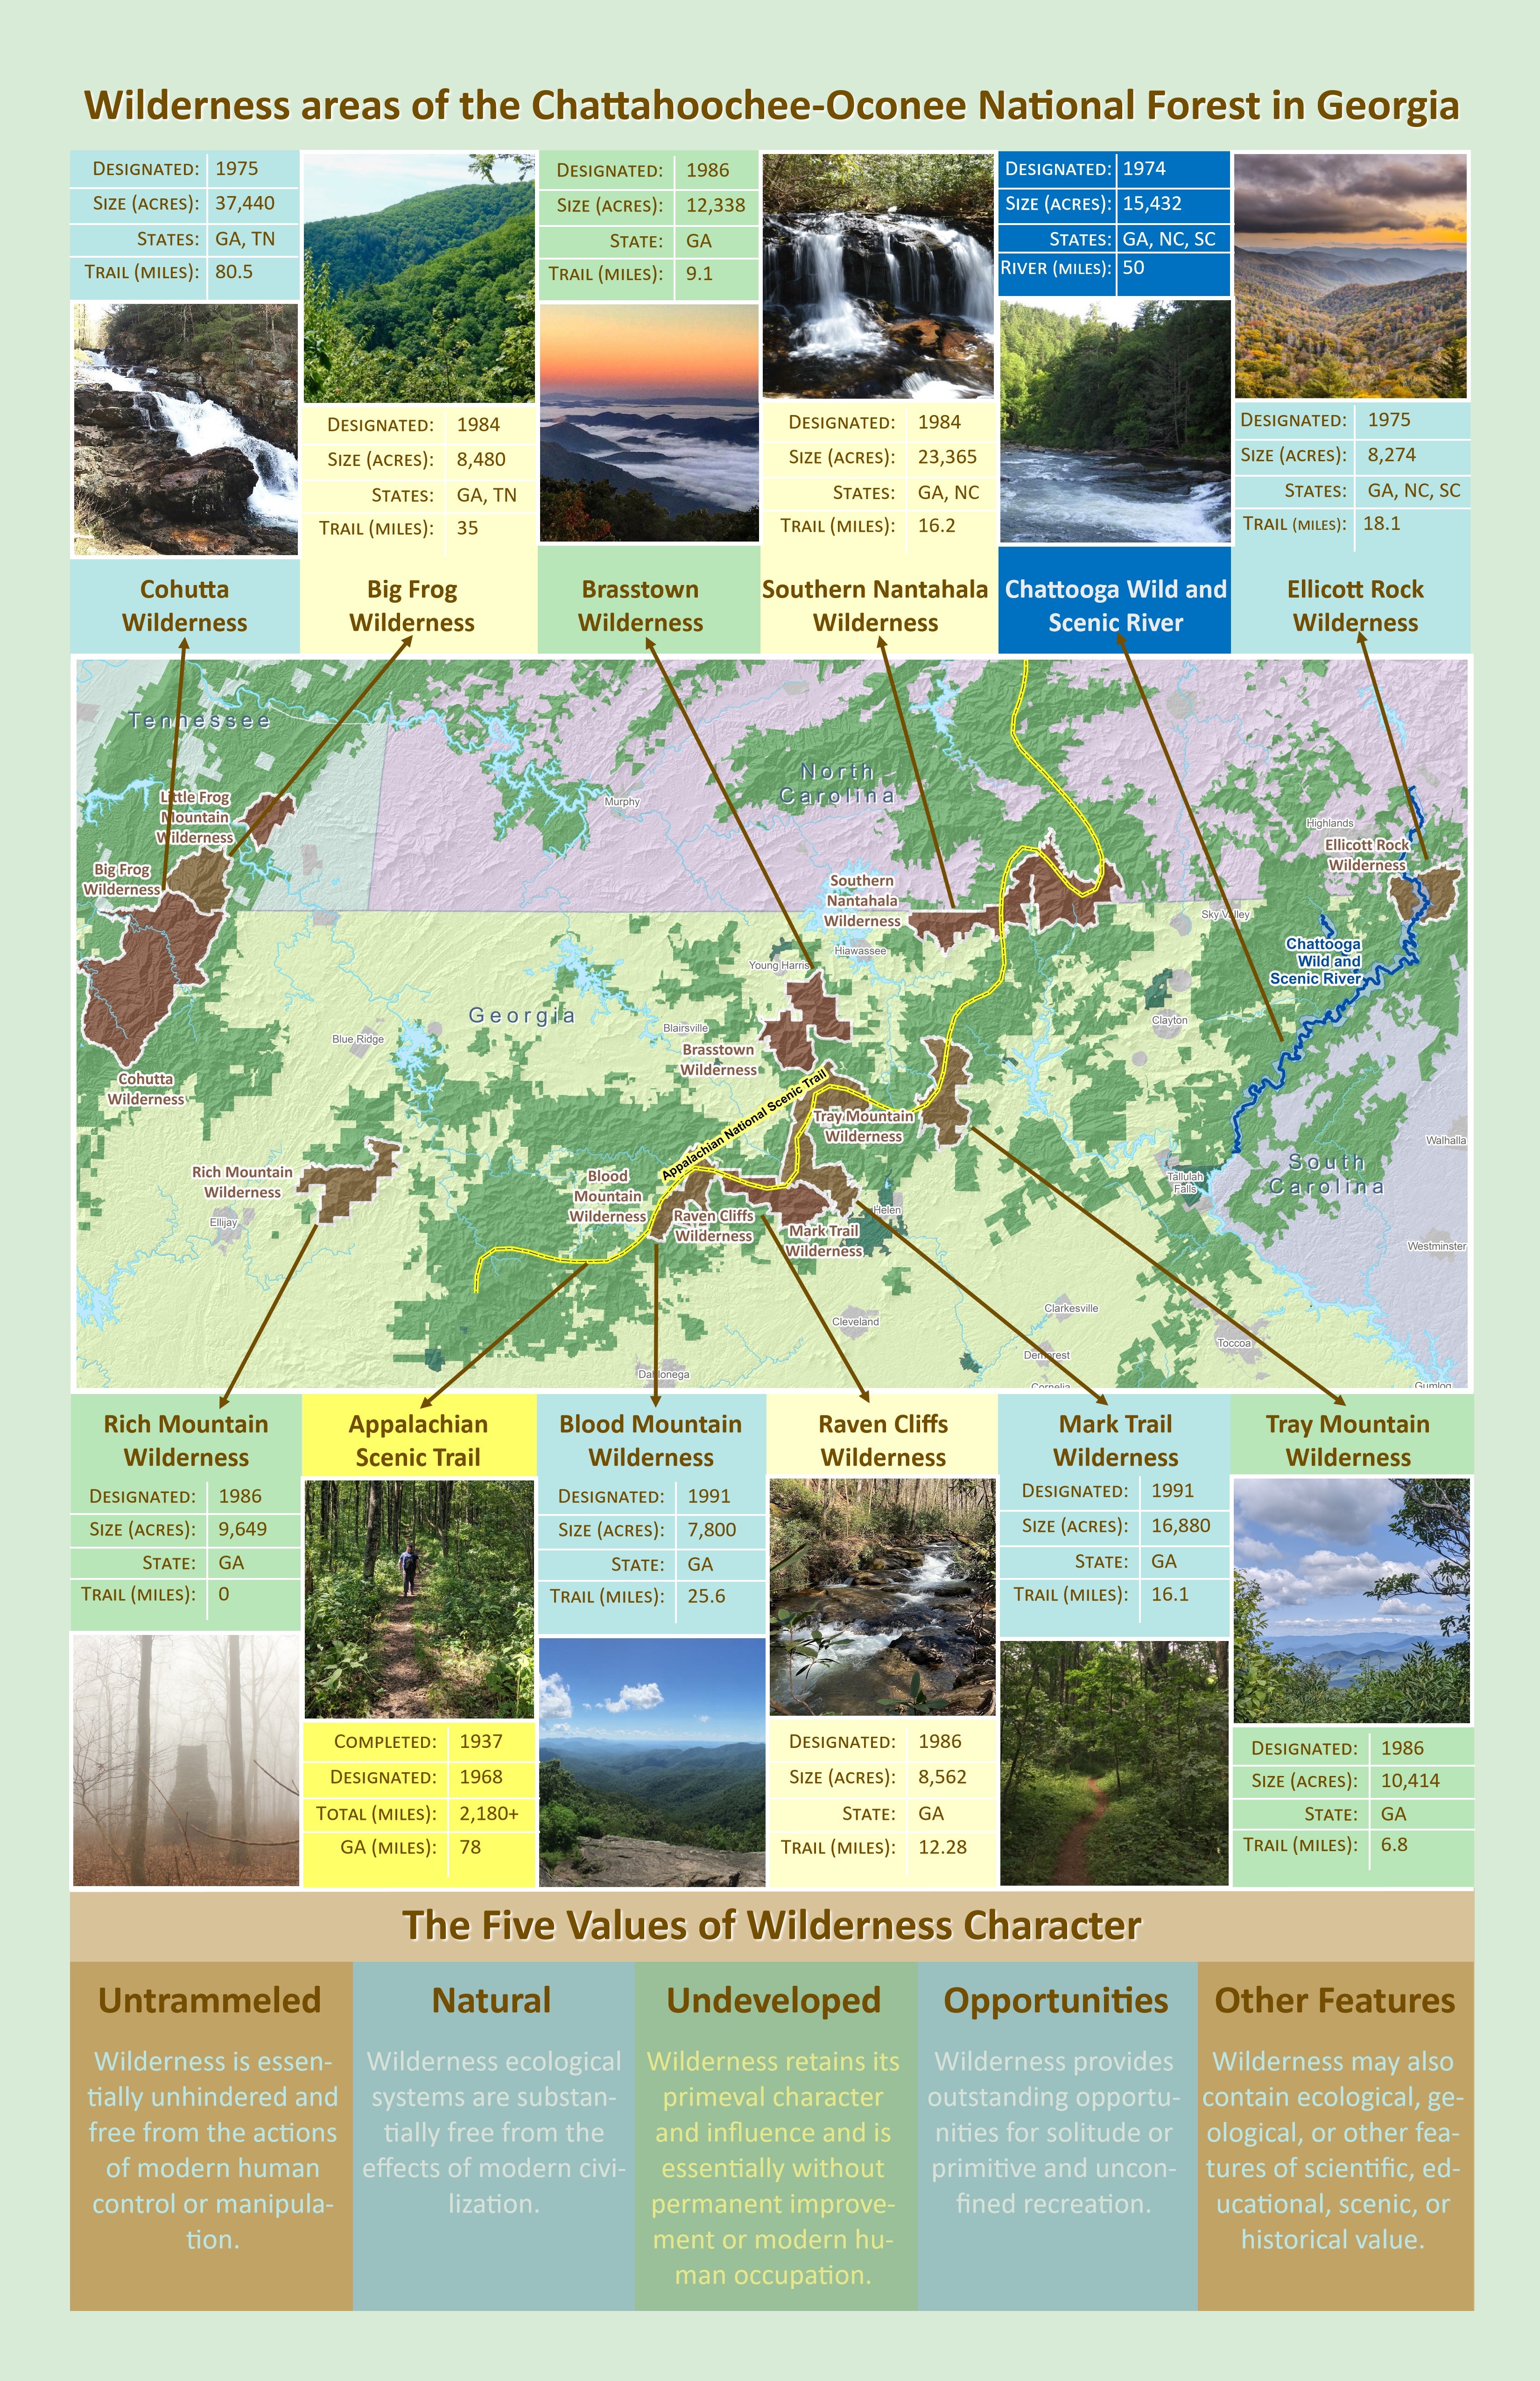 Wilderness areas of the Chattahoochee-Oconee National Forest in Georgia